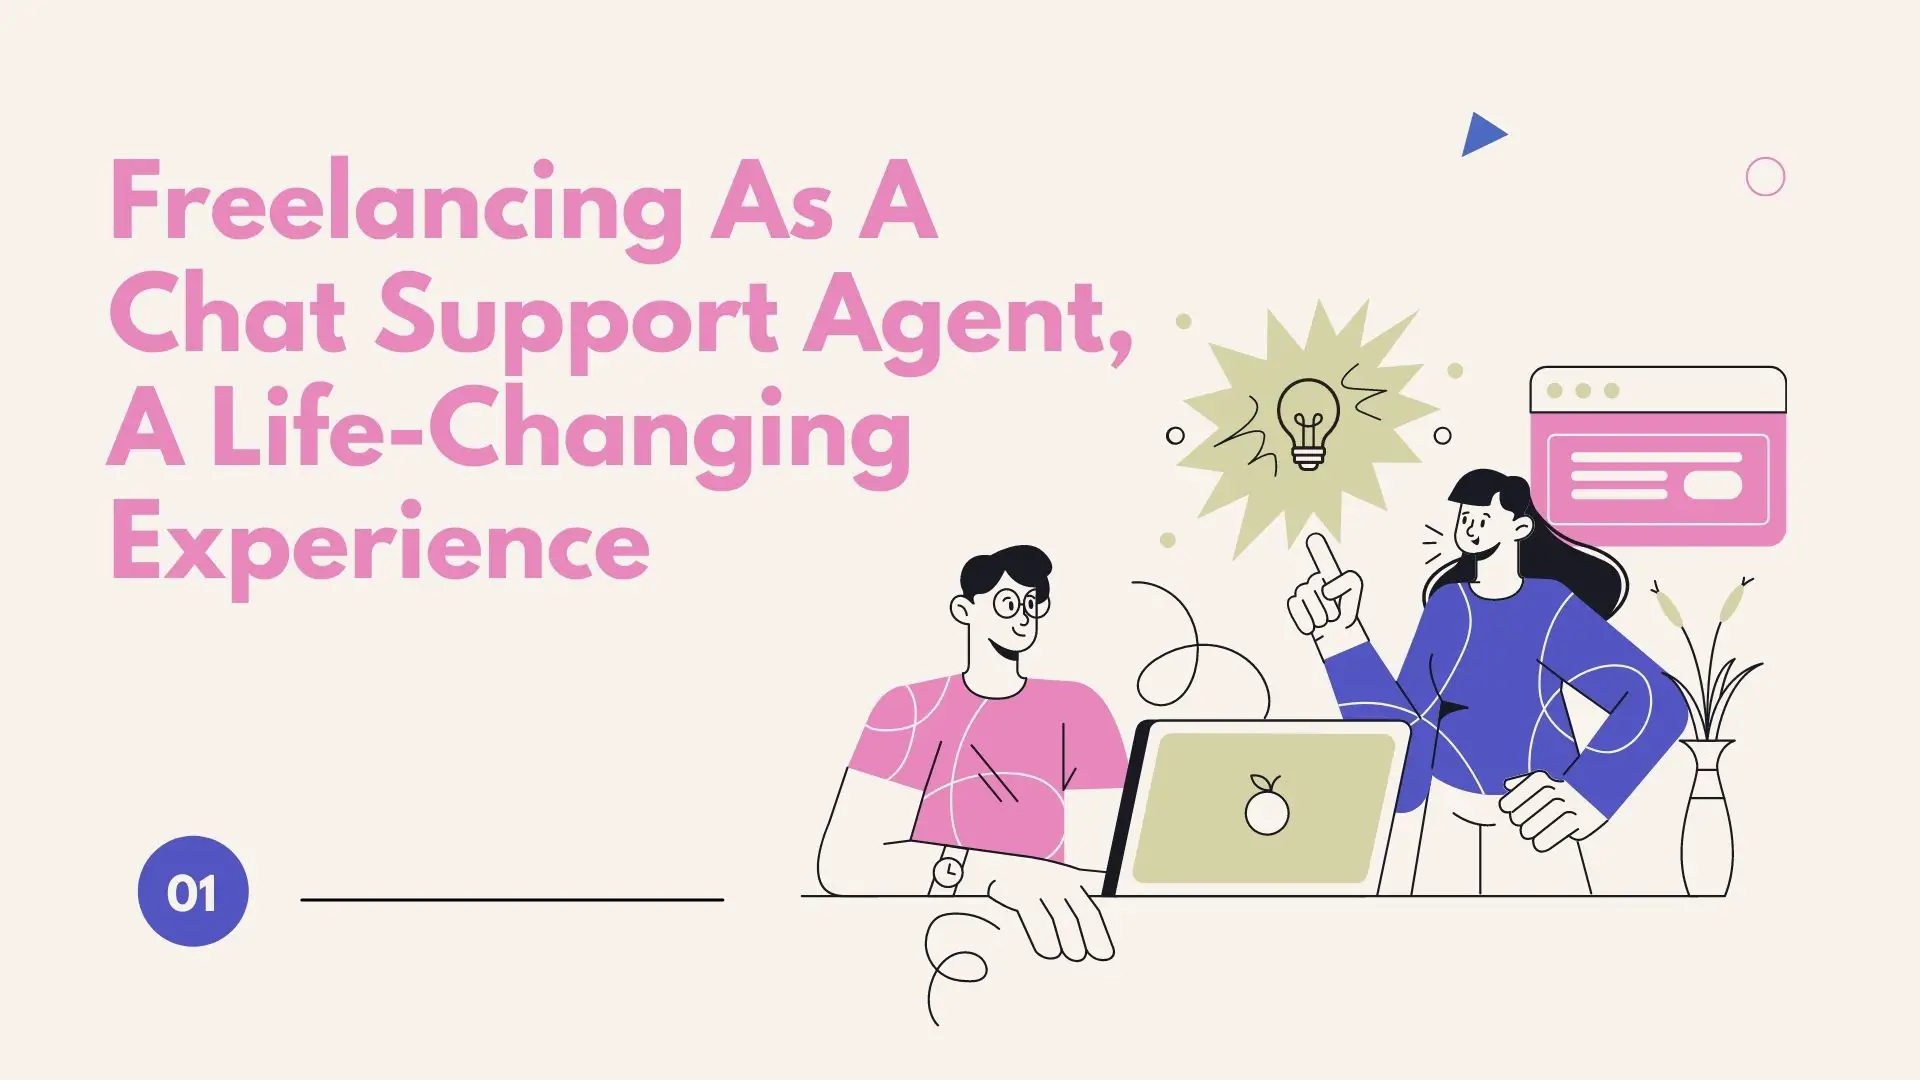 Freelancing As A Chat Support Agent, A Life-Changing Experience